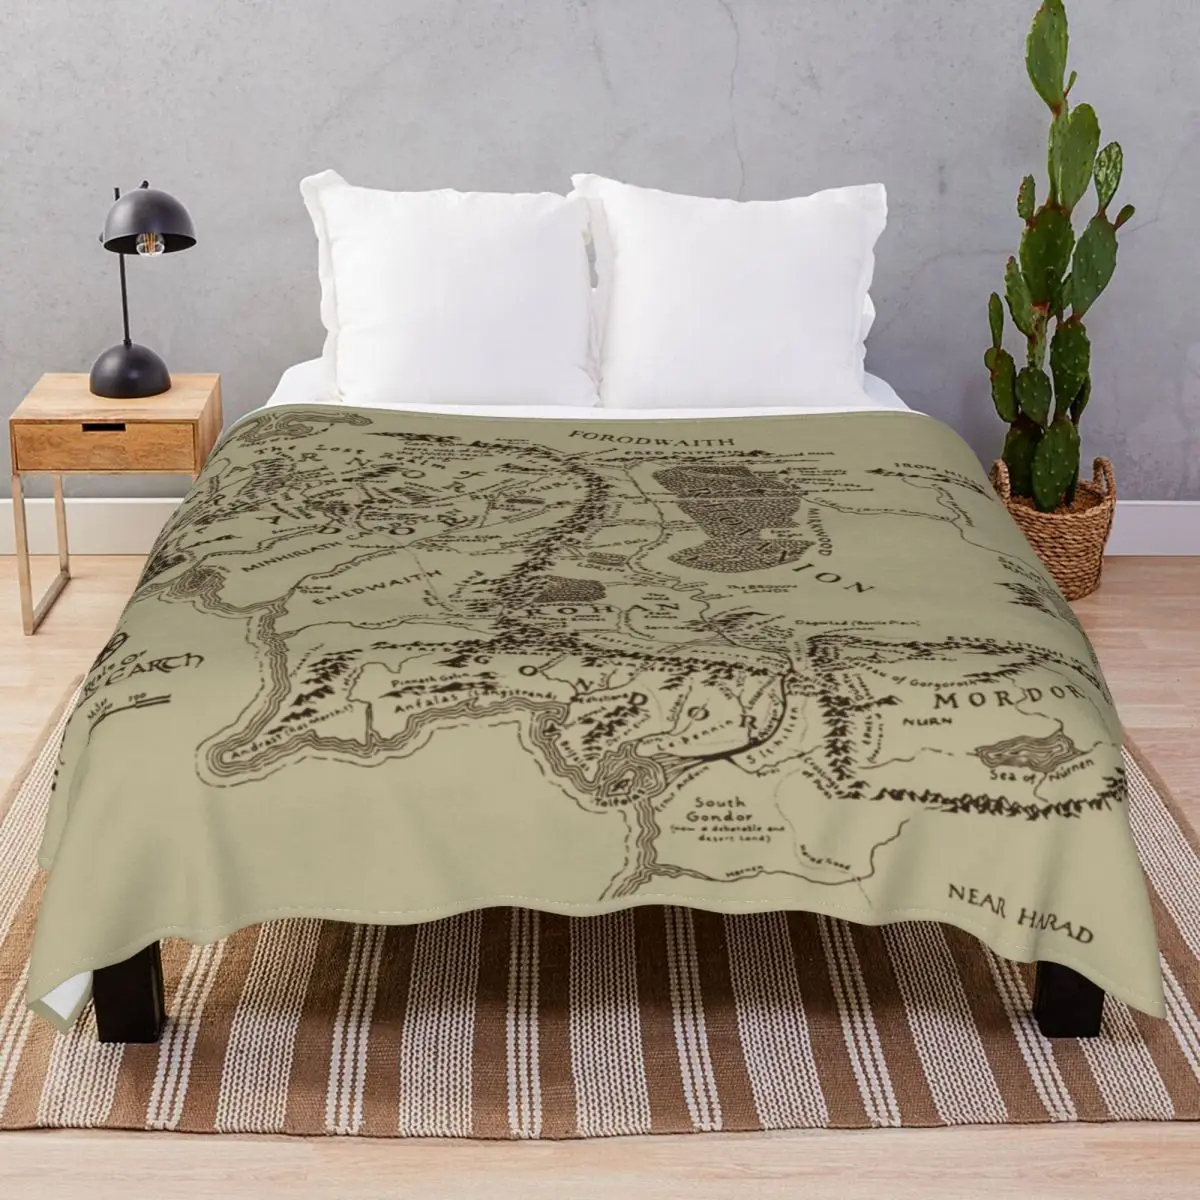 Map Blankets Flannel Textile Decor Lightweight Thin Throw Blanket for Bedding Sofa Camp Office